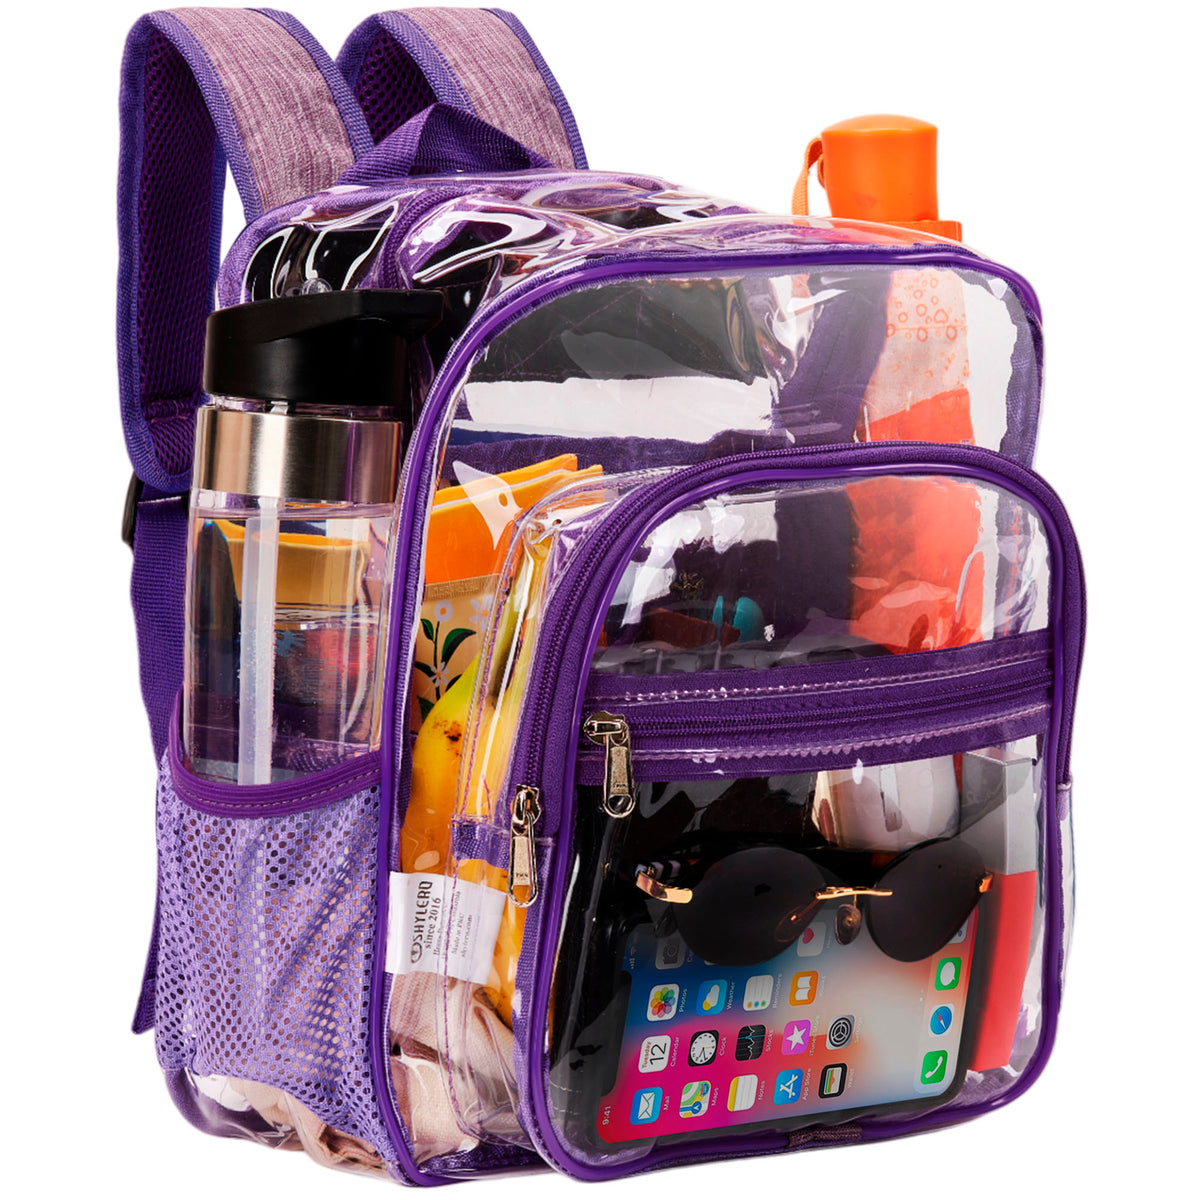 Clear PVC Backpack Stadium Approved | S | 2-WAY Zip | H11.8''xW11''xD6''| Violet